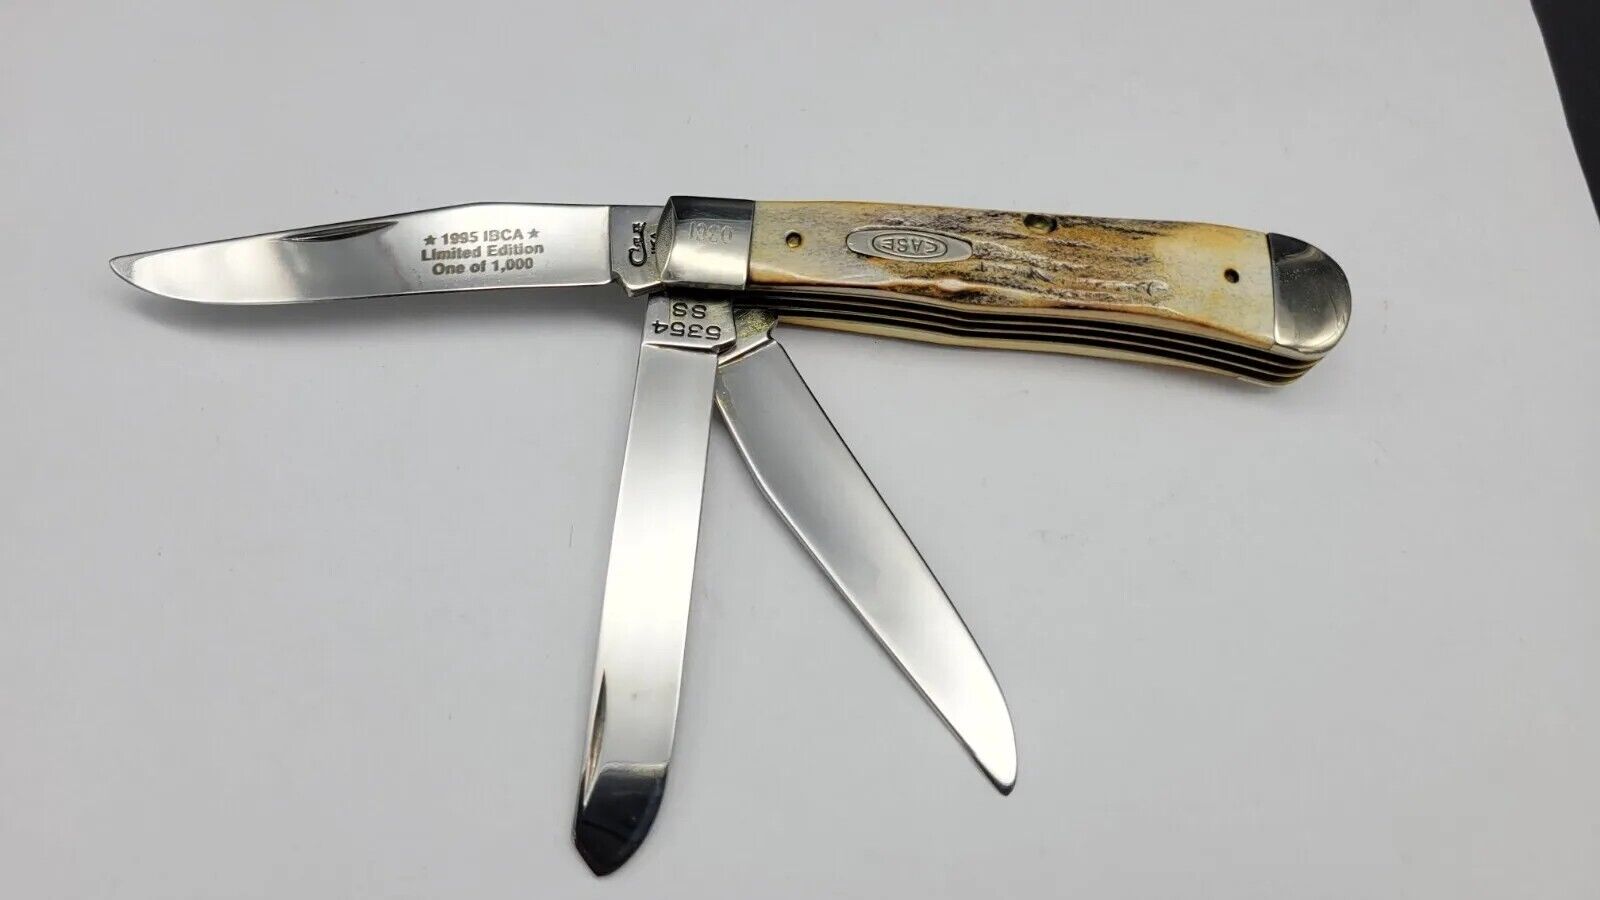 CASE USA 1995 IBCA Limited Edition 5354 SS Stag Pocket Knife, Unused